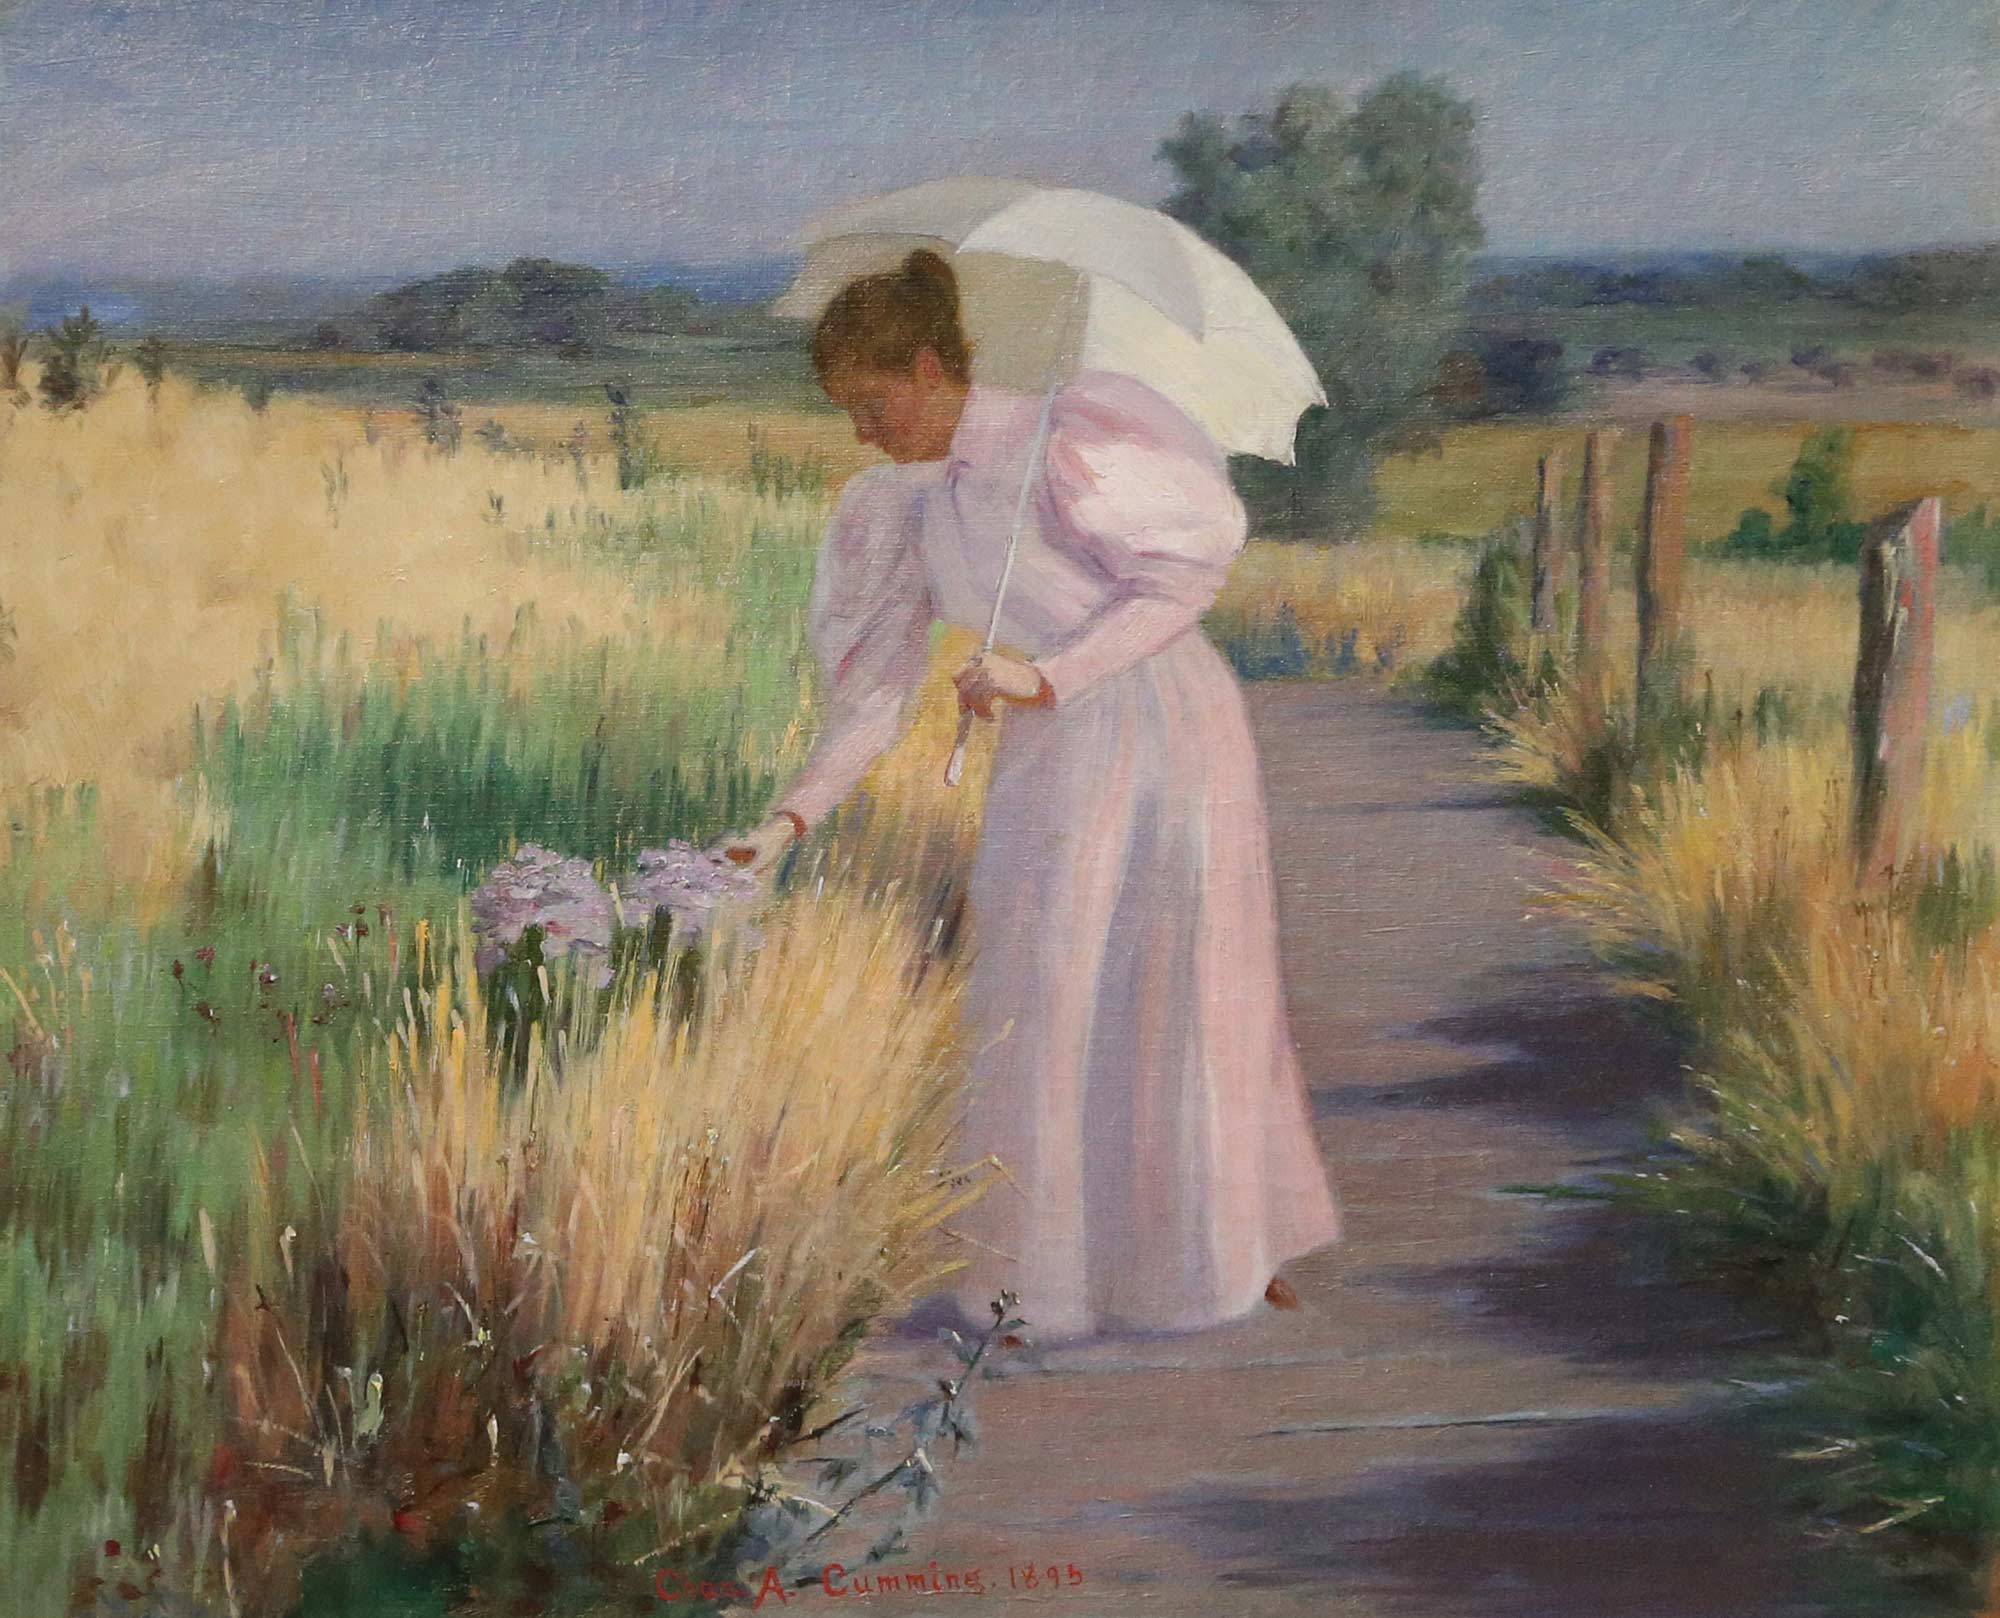 A painting of a woman in a flowing pink dress carrying a parasol, leaning down to touch flowers along a walkway.